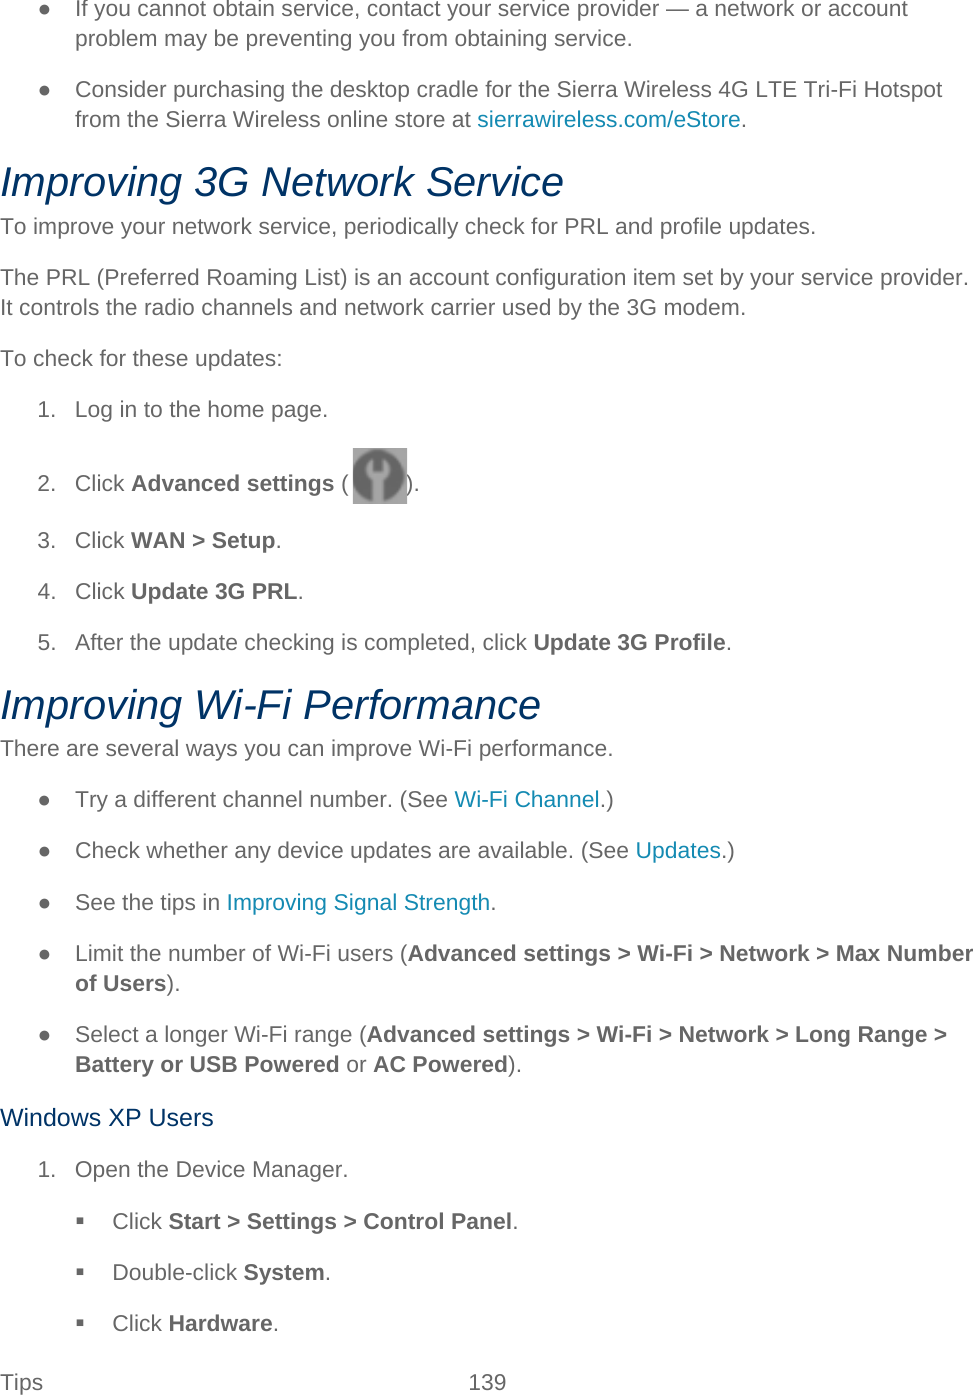 Tips 139   ● If you cannot obtain service, contact your service provider — a network or account problem may be preventing you from obtaining service. ● Consider purchasing the desktop cradle for the Sierra Wireless 4G LTE Tri-Fi Hotspot from the Sierra Wireless online store at sierrawireless.com/eStore. Improving 3G Network Service To improve your network service, periodically check for PRL and profile updates. The PRL (Preferred Roaming List) is an account configuration item set by your service provider. It controls the radio channels and network carrier used by the 3G modem. To check for these updates: 1. Log in to the home page. 2. Click Advanced settings ( ). 3. Click WAN &gt; Setup. 4. Click Update 3G PRL. 5. After the update checking is completed, click Update 3G Profile. Improving Wi-Fi Performance There are several ways you can improve Wi-Fi performance. ● Try a different channel number. (See Wi-Fi Channel.) ● Check whether any device updates are available. (See Updates.) ● See the tips in Improving Signal Strength. ● Limit the number of Wi-Fi users (Advanced settings &gt; Wi-Fi &gt; Network &gt; Max Number of Users). ● Select a longer Wi-Fi range (Advanced settings &gt; Wi-Fi &gt; Network &gt; Long Range &gt; Battery or USB Powered or AC Powered). Windows XP Users 1. Open the Device Manager.  Click Start &gt; Settings &gt; Control Panel.  Double-click System.  Click Hardware. 